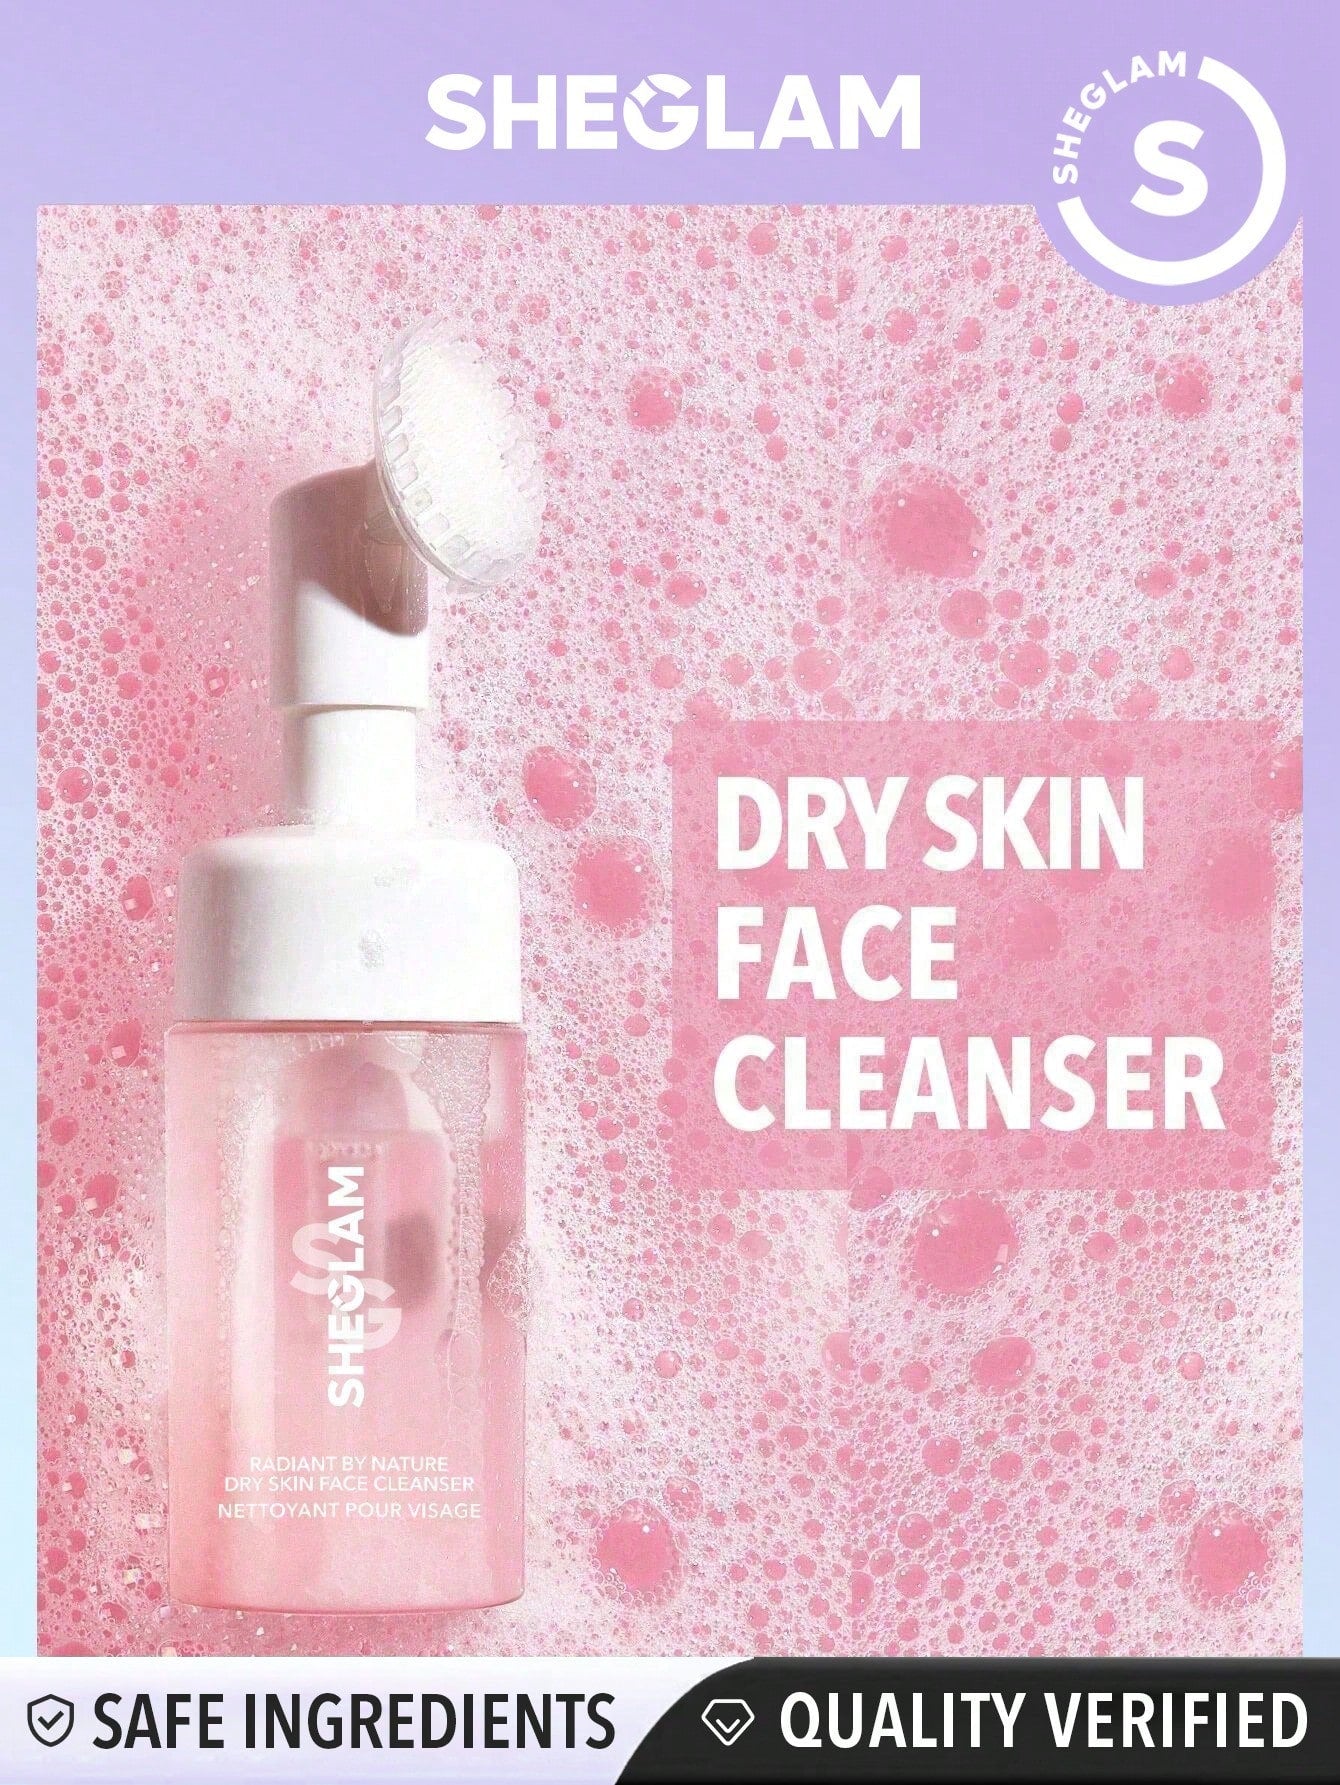 SHEGLAM Radiant By Nature Oily Skin Face Cleanser 100ml Hydrating Gentle Daily Facial Wash Liquid To Foam - Negative Apparel